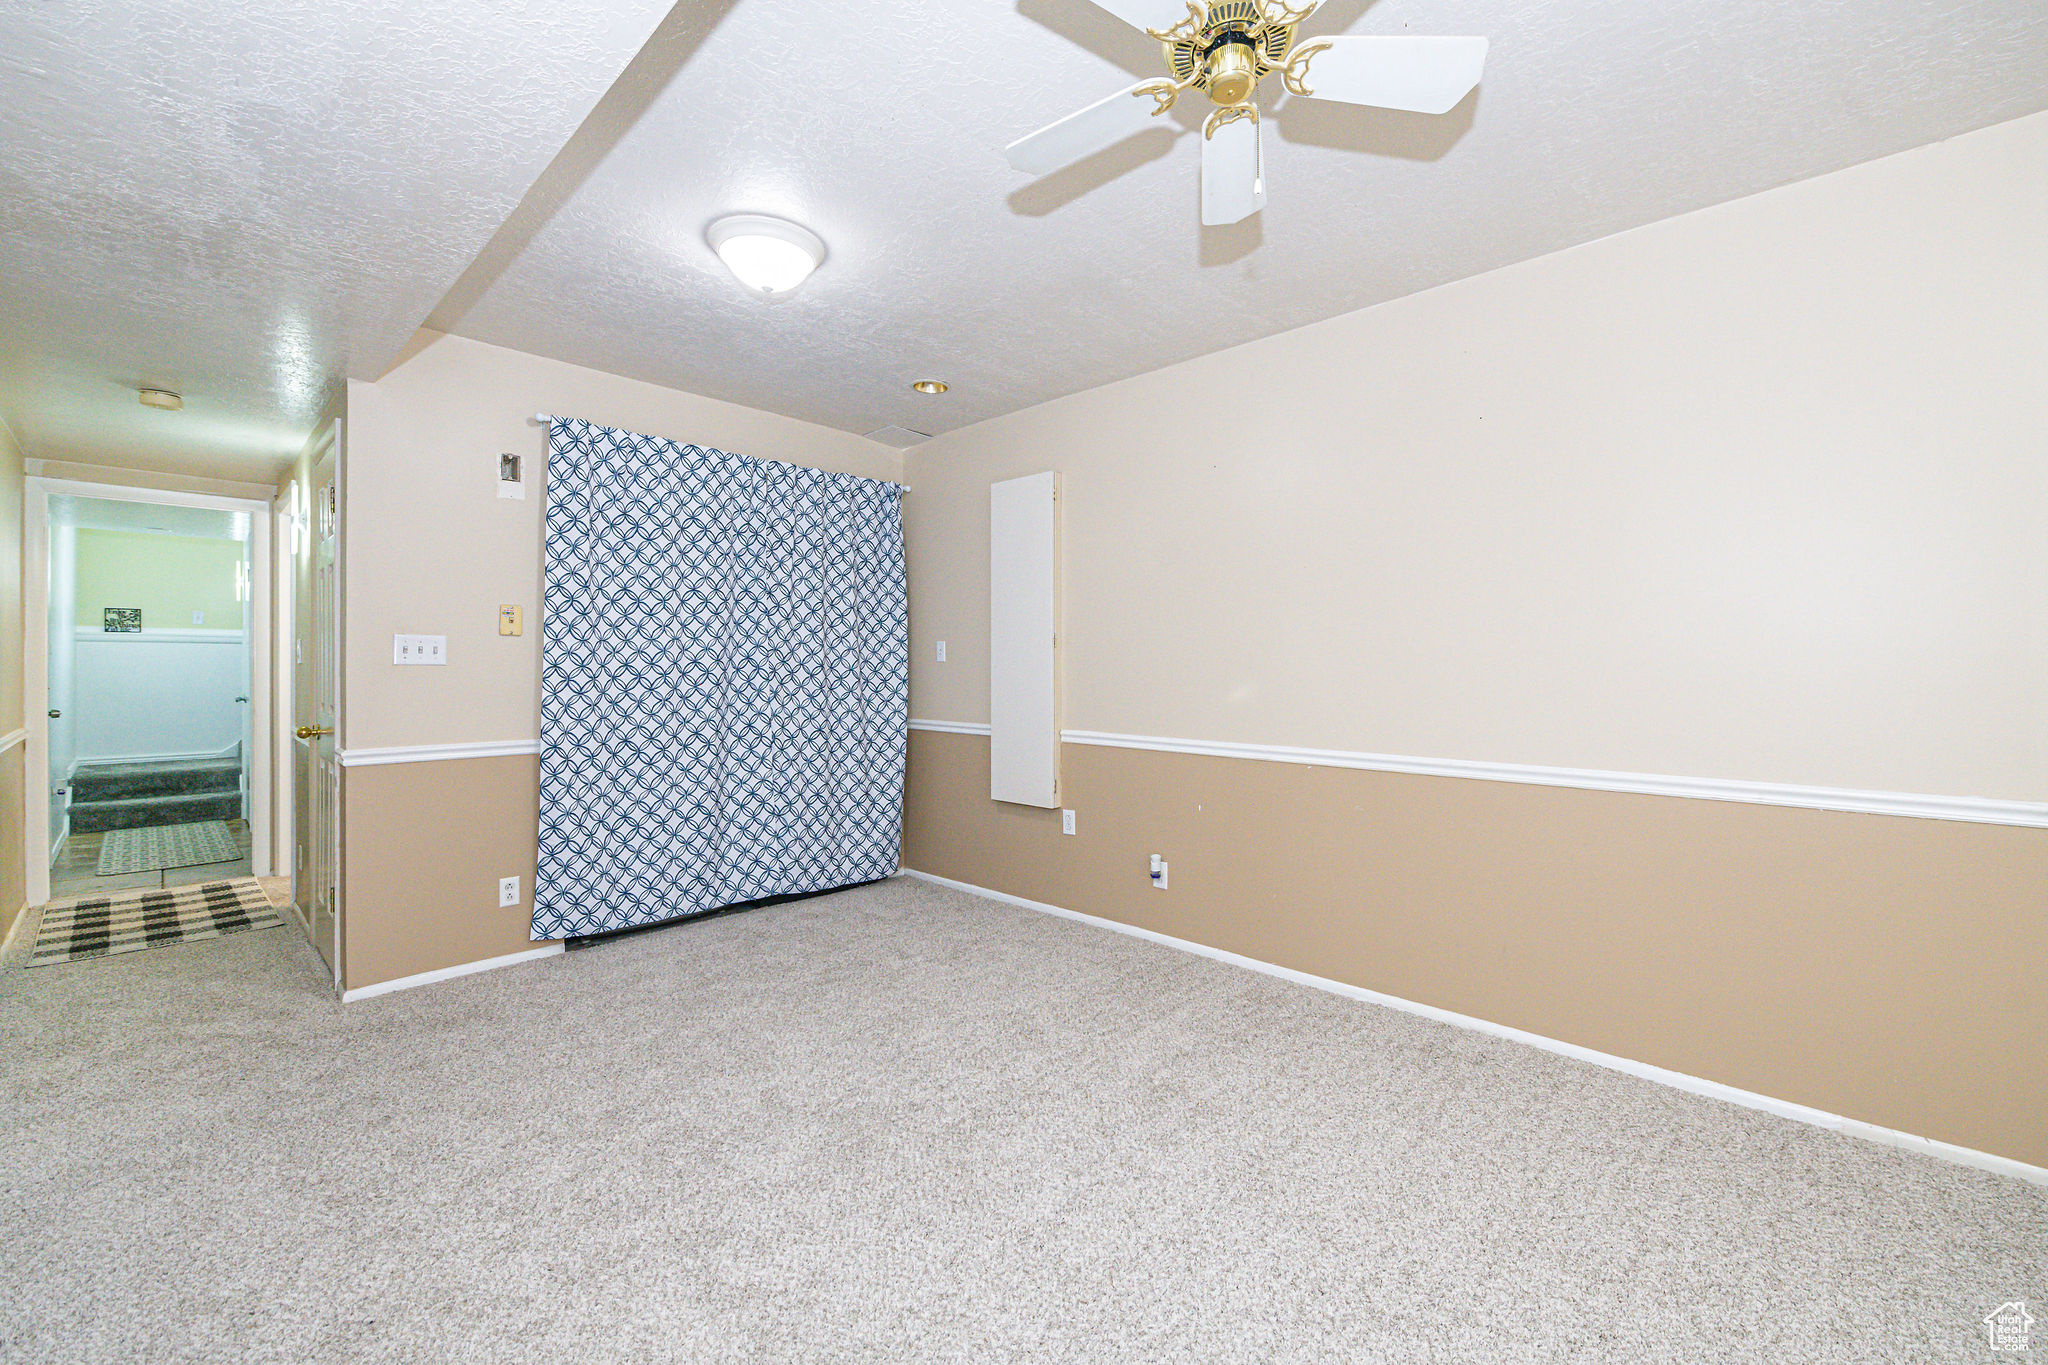 Carpeted spare room featuring a textured ceiling and ceiling fan